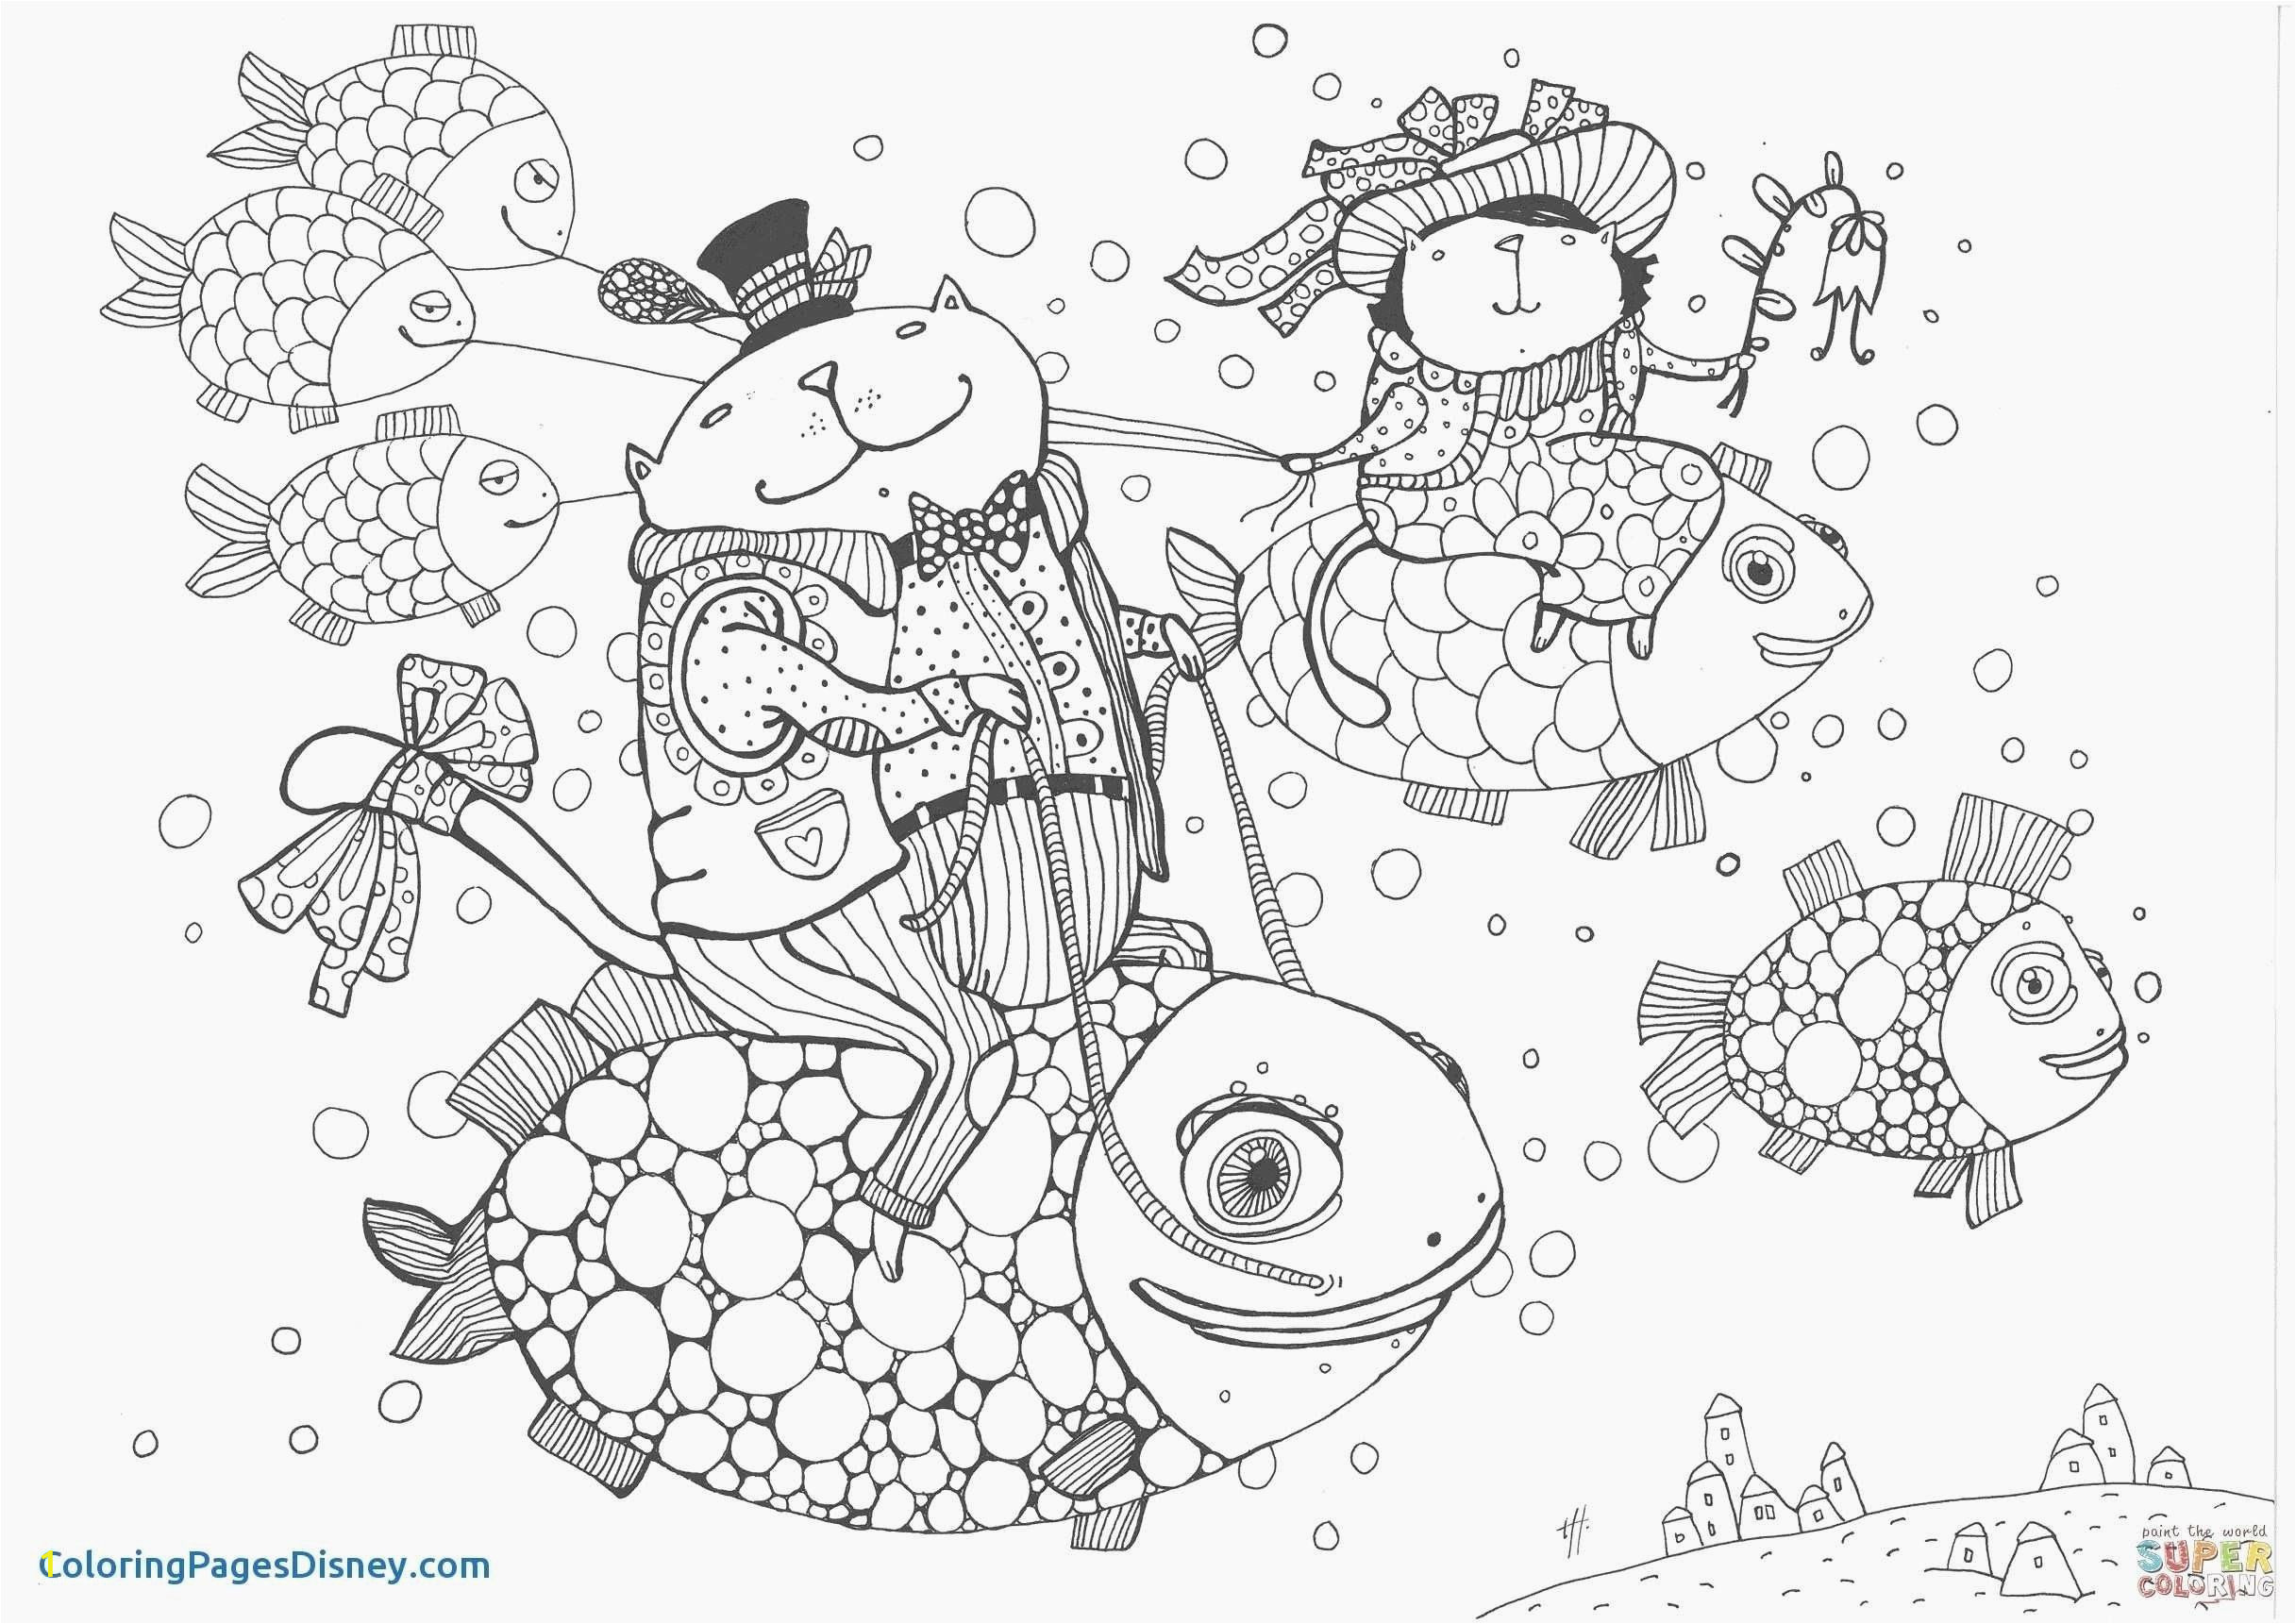 Disney Coloring Pages to Print Coloring Pages Free Disney Coloring Pages for Adults Free